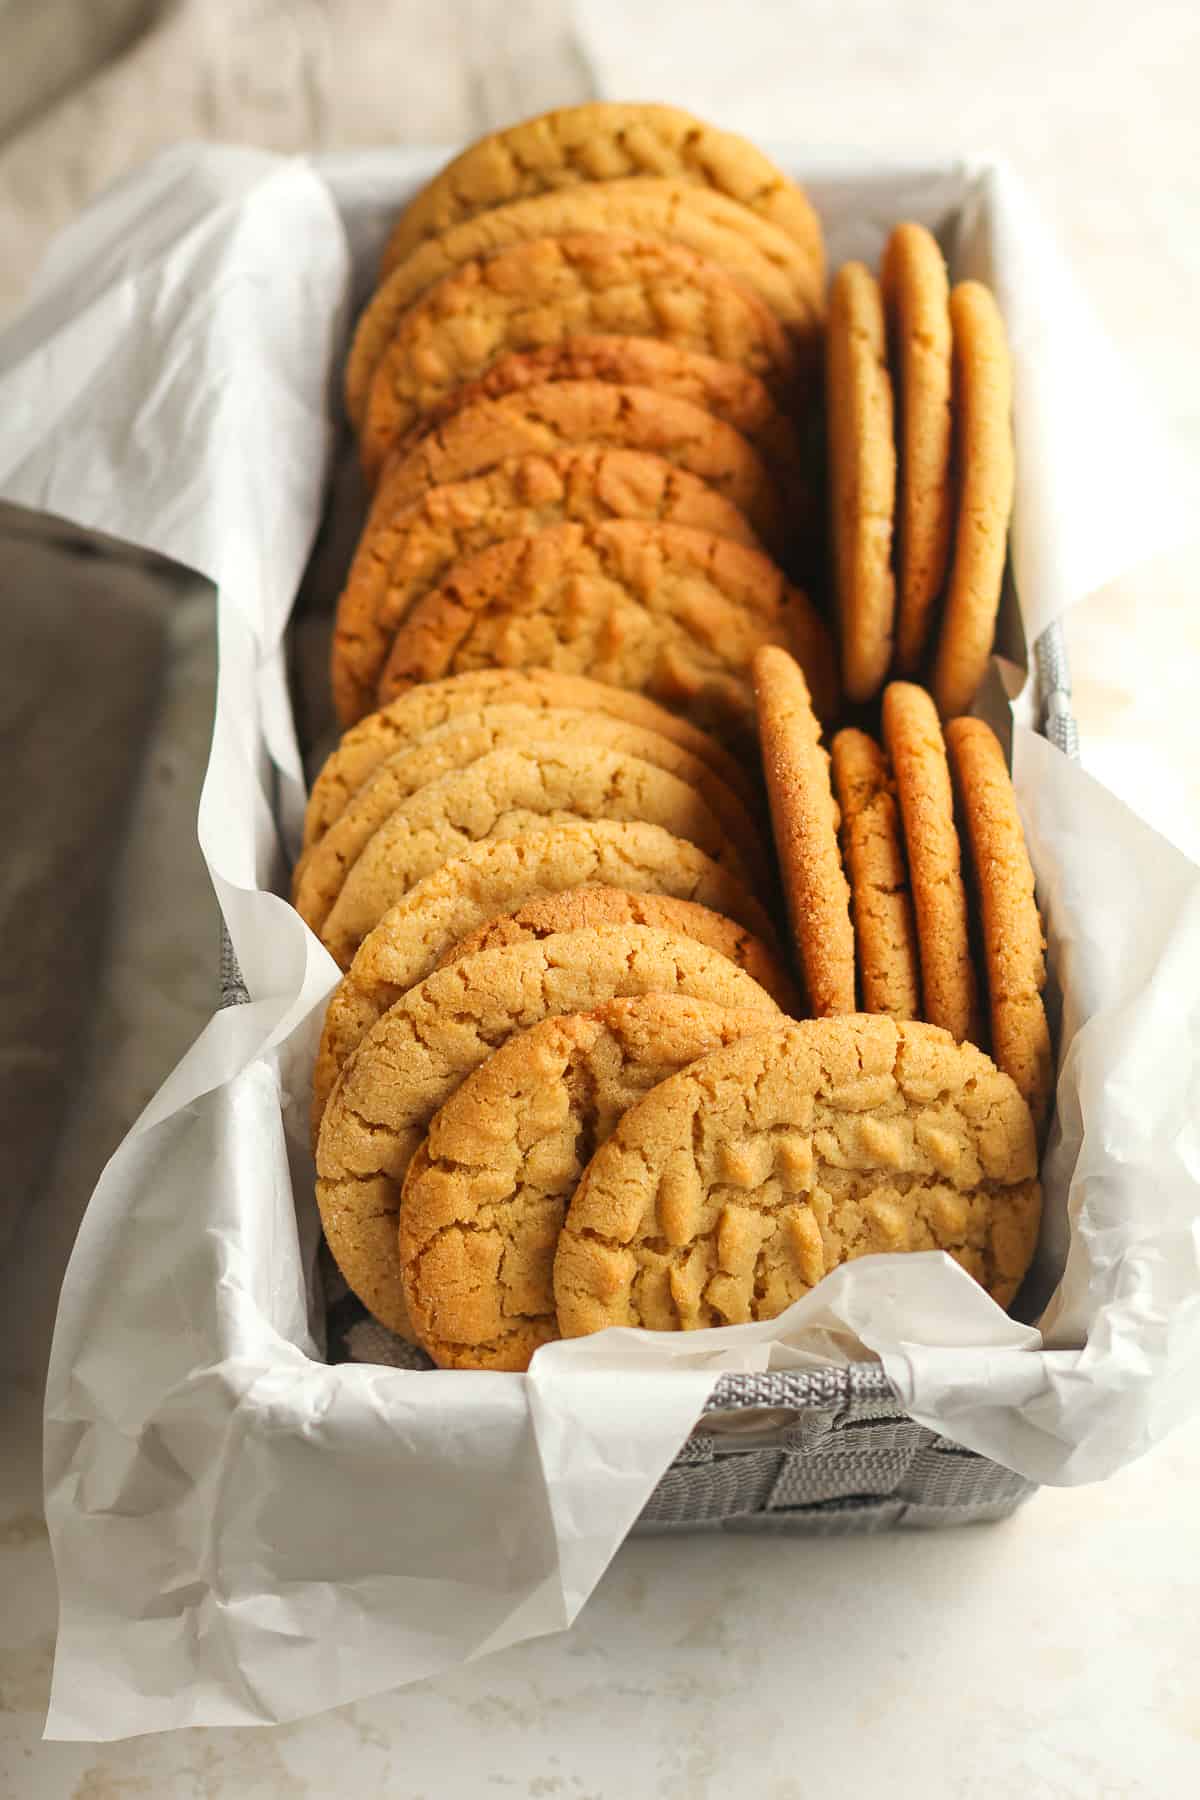 Side view of a rectangular basket of peanut butter cookies.